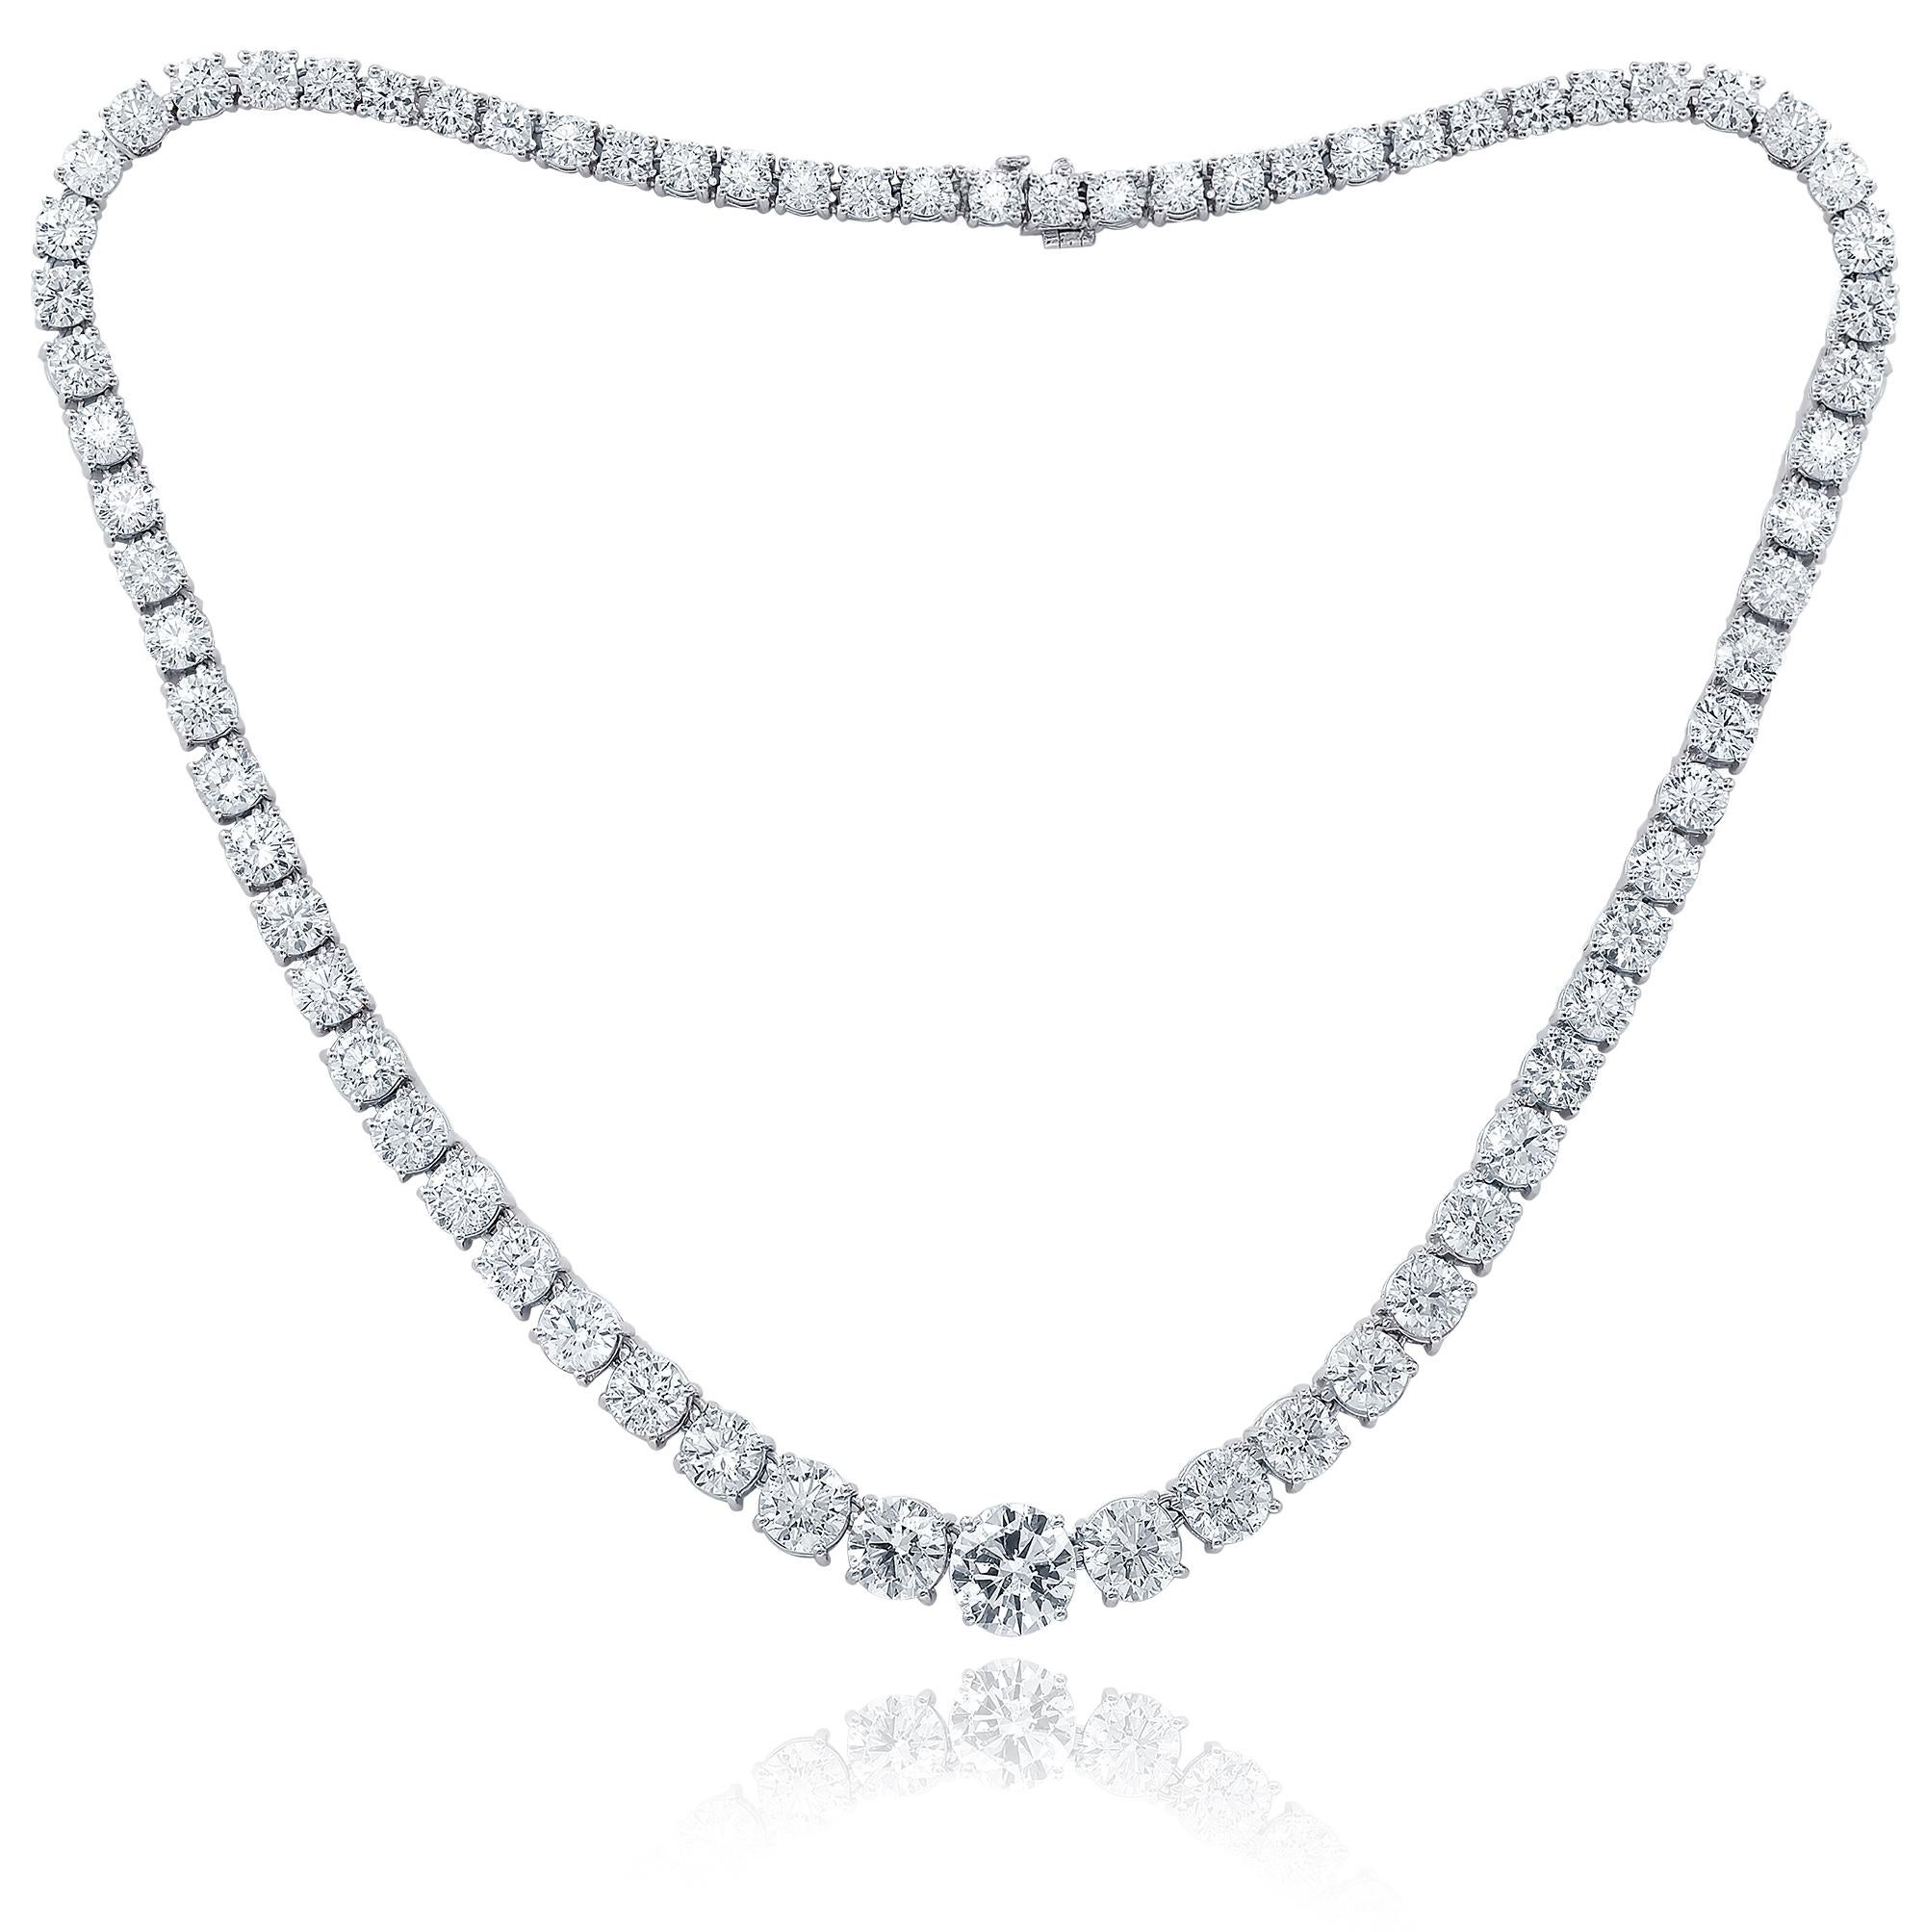 Custom 18k white gold graduated tennis necklace 24.15 cts  round brilliant diamonds set in a 4 prong setting 89 stones 0.27 each FG color SI clarity. Excellent  cut. 
